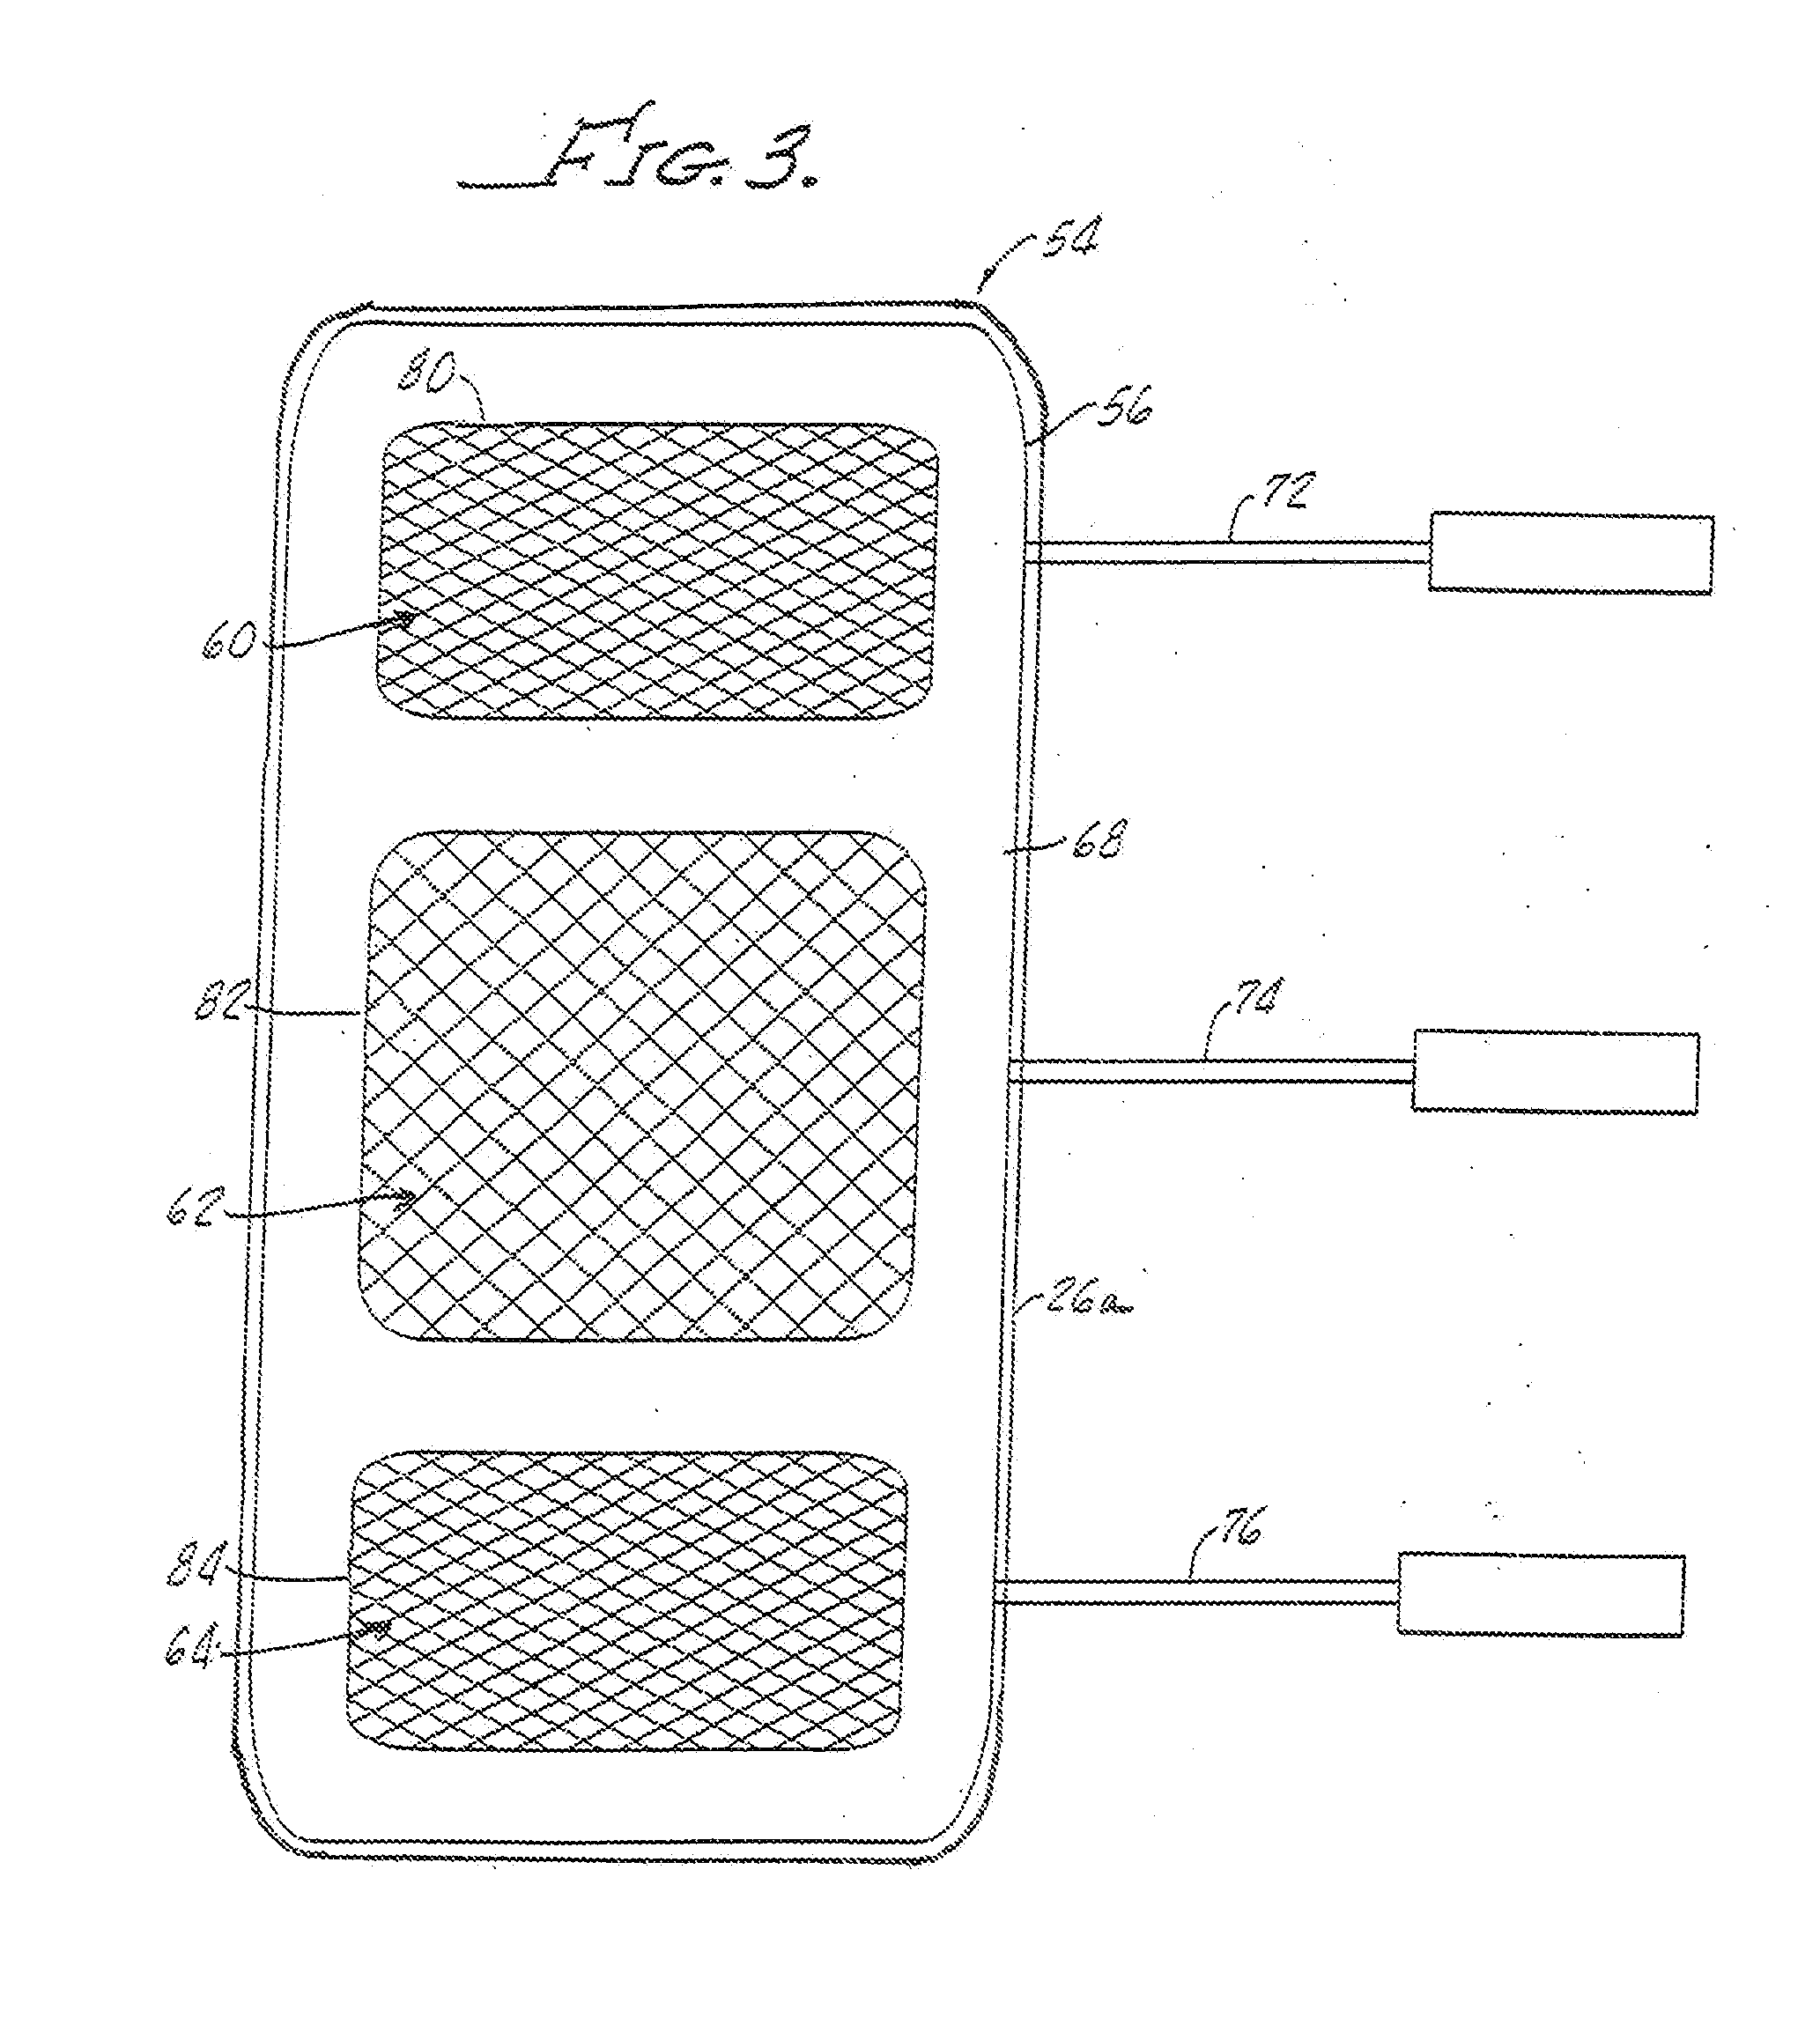 Multi-electrode with lateral conductivity control